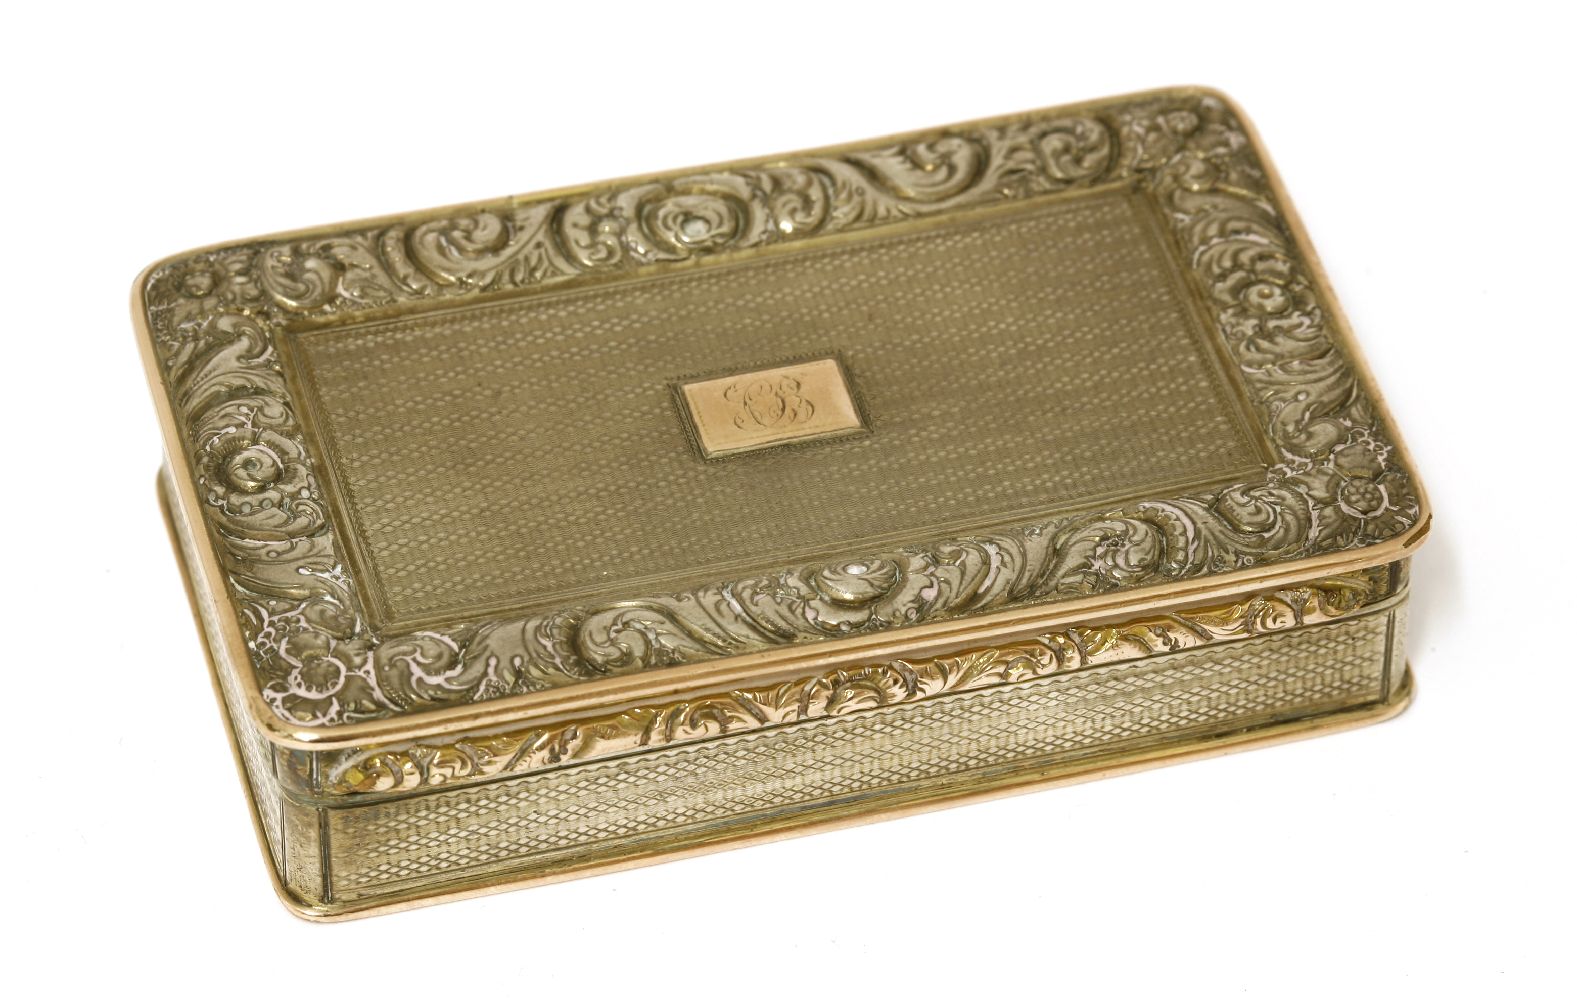 A George IV silver and gold-edged snuff box,William Ellerby, London 1823,of rectangular form with